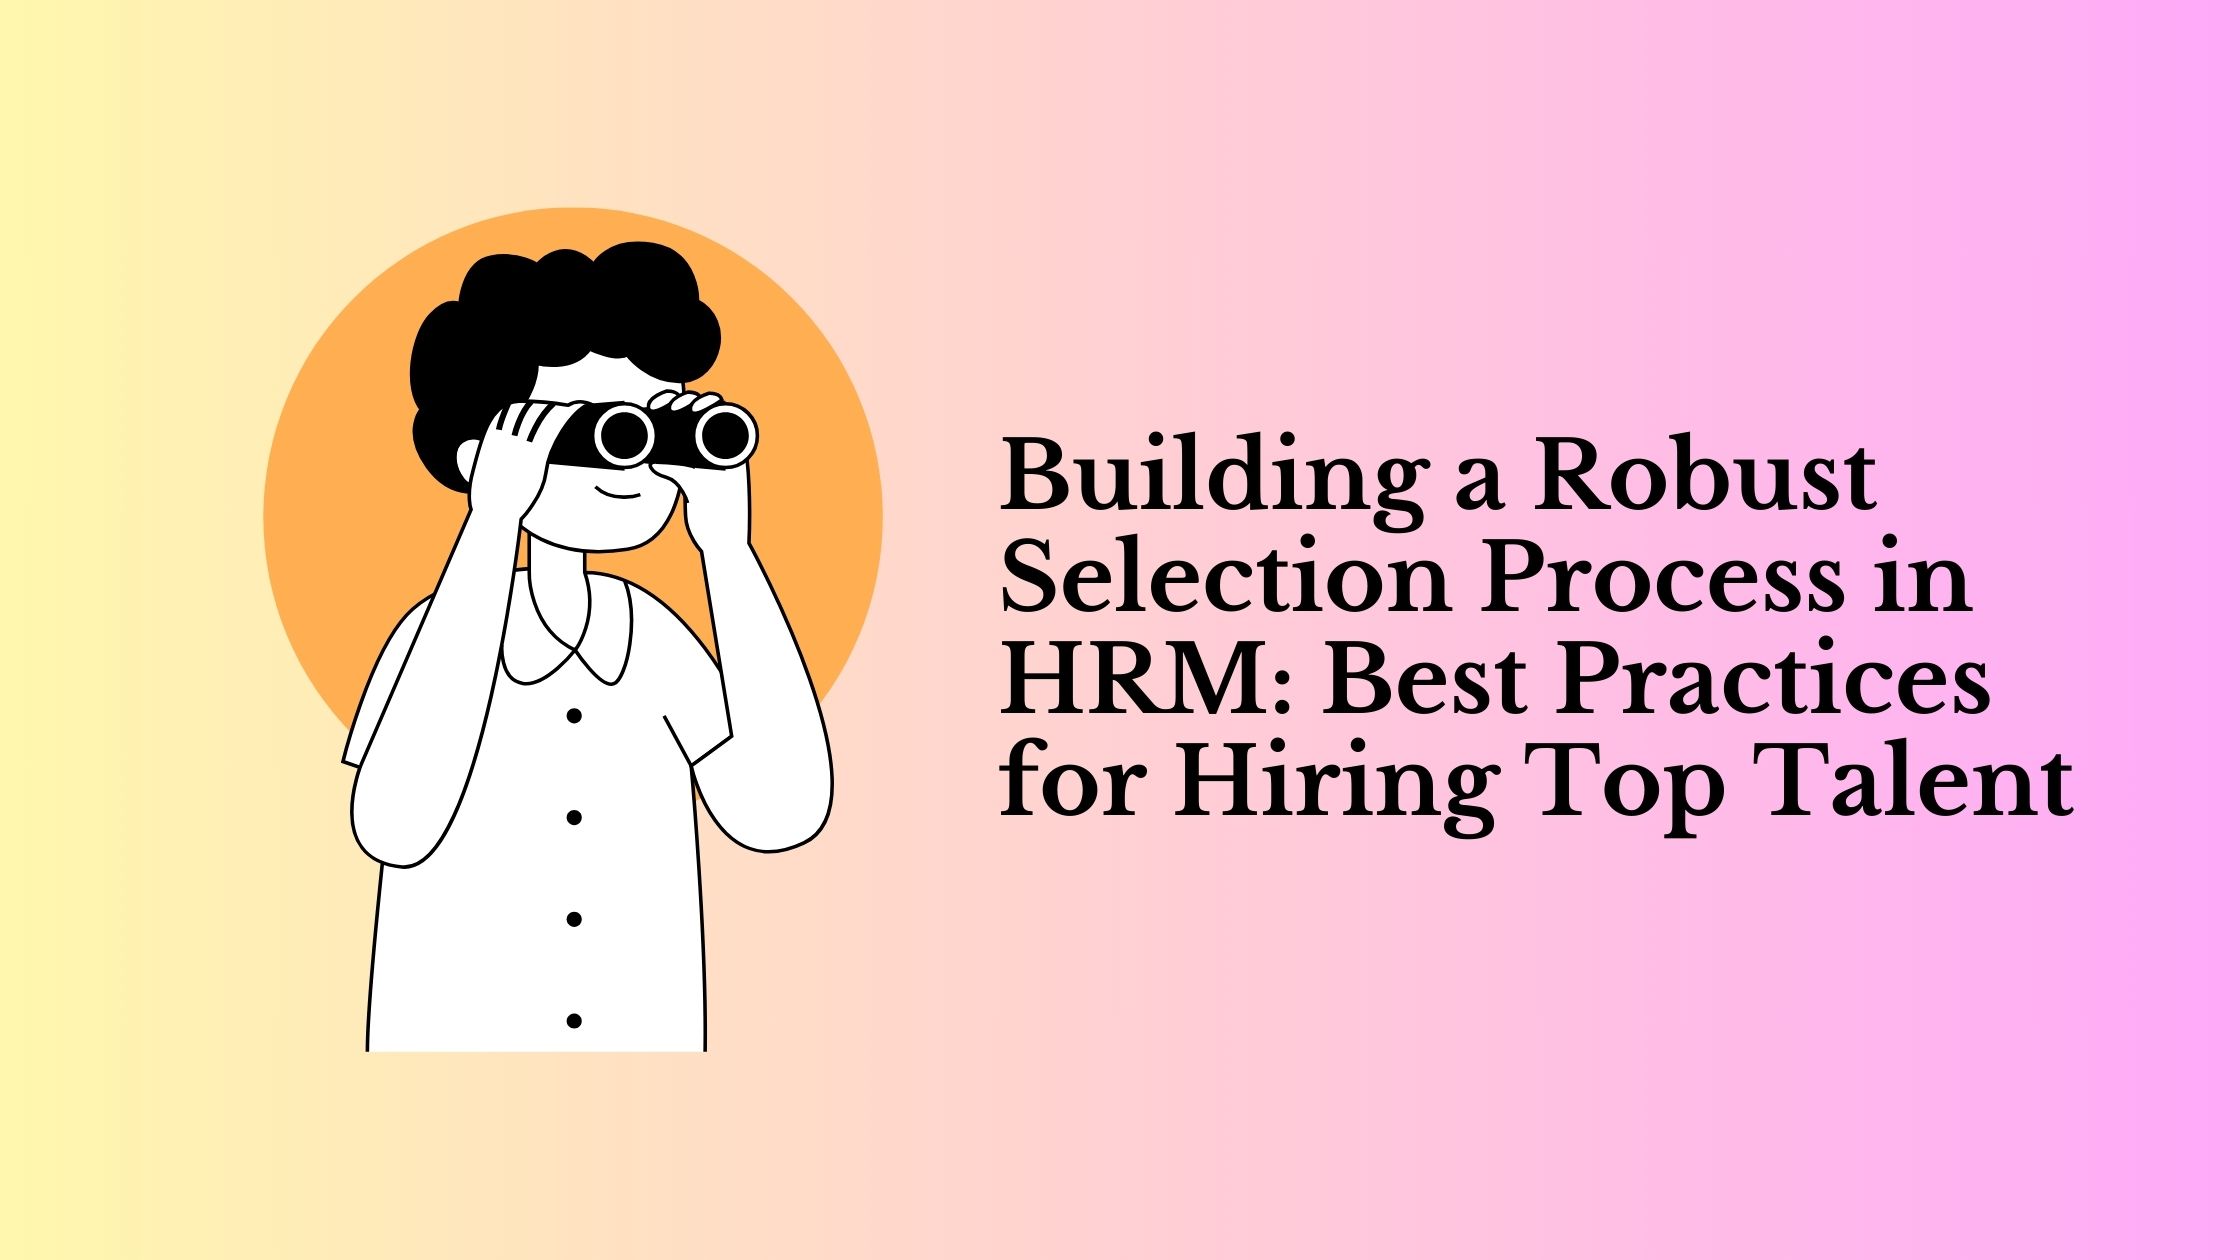 Building a Robust Selection Process in HRM: Best Practices for Hiring Top Talent